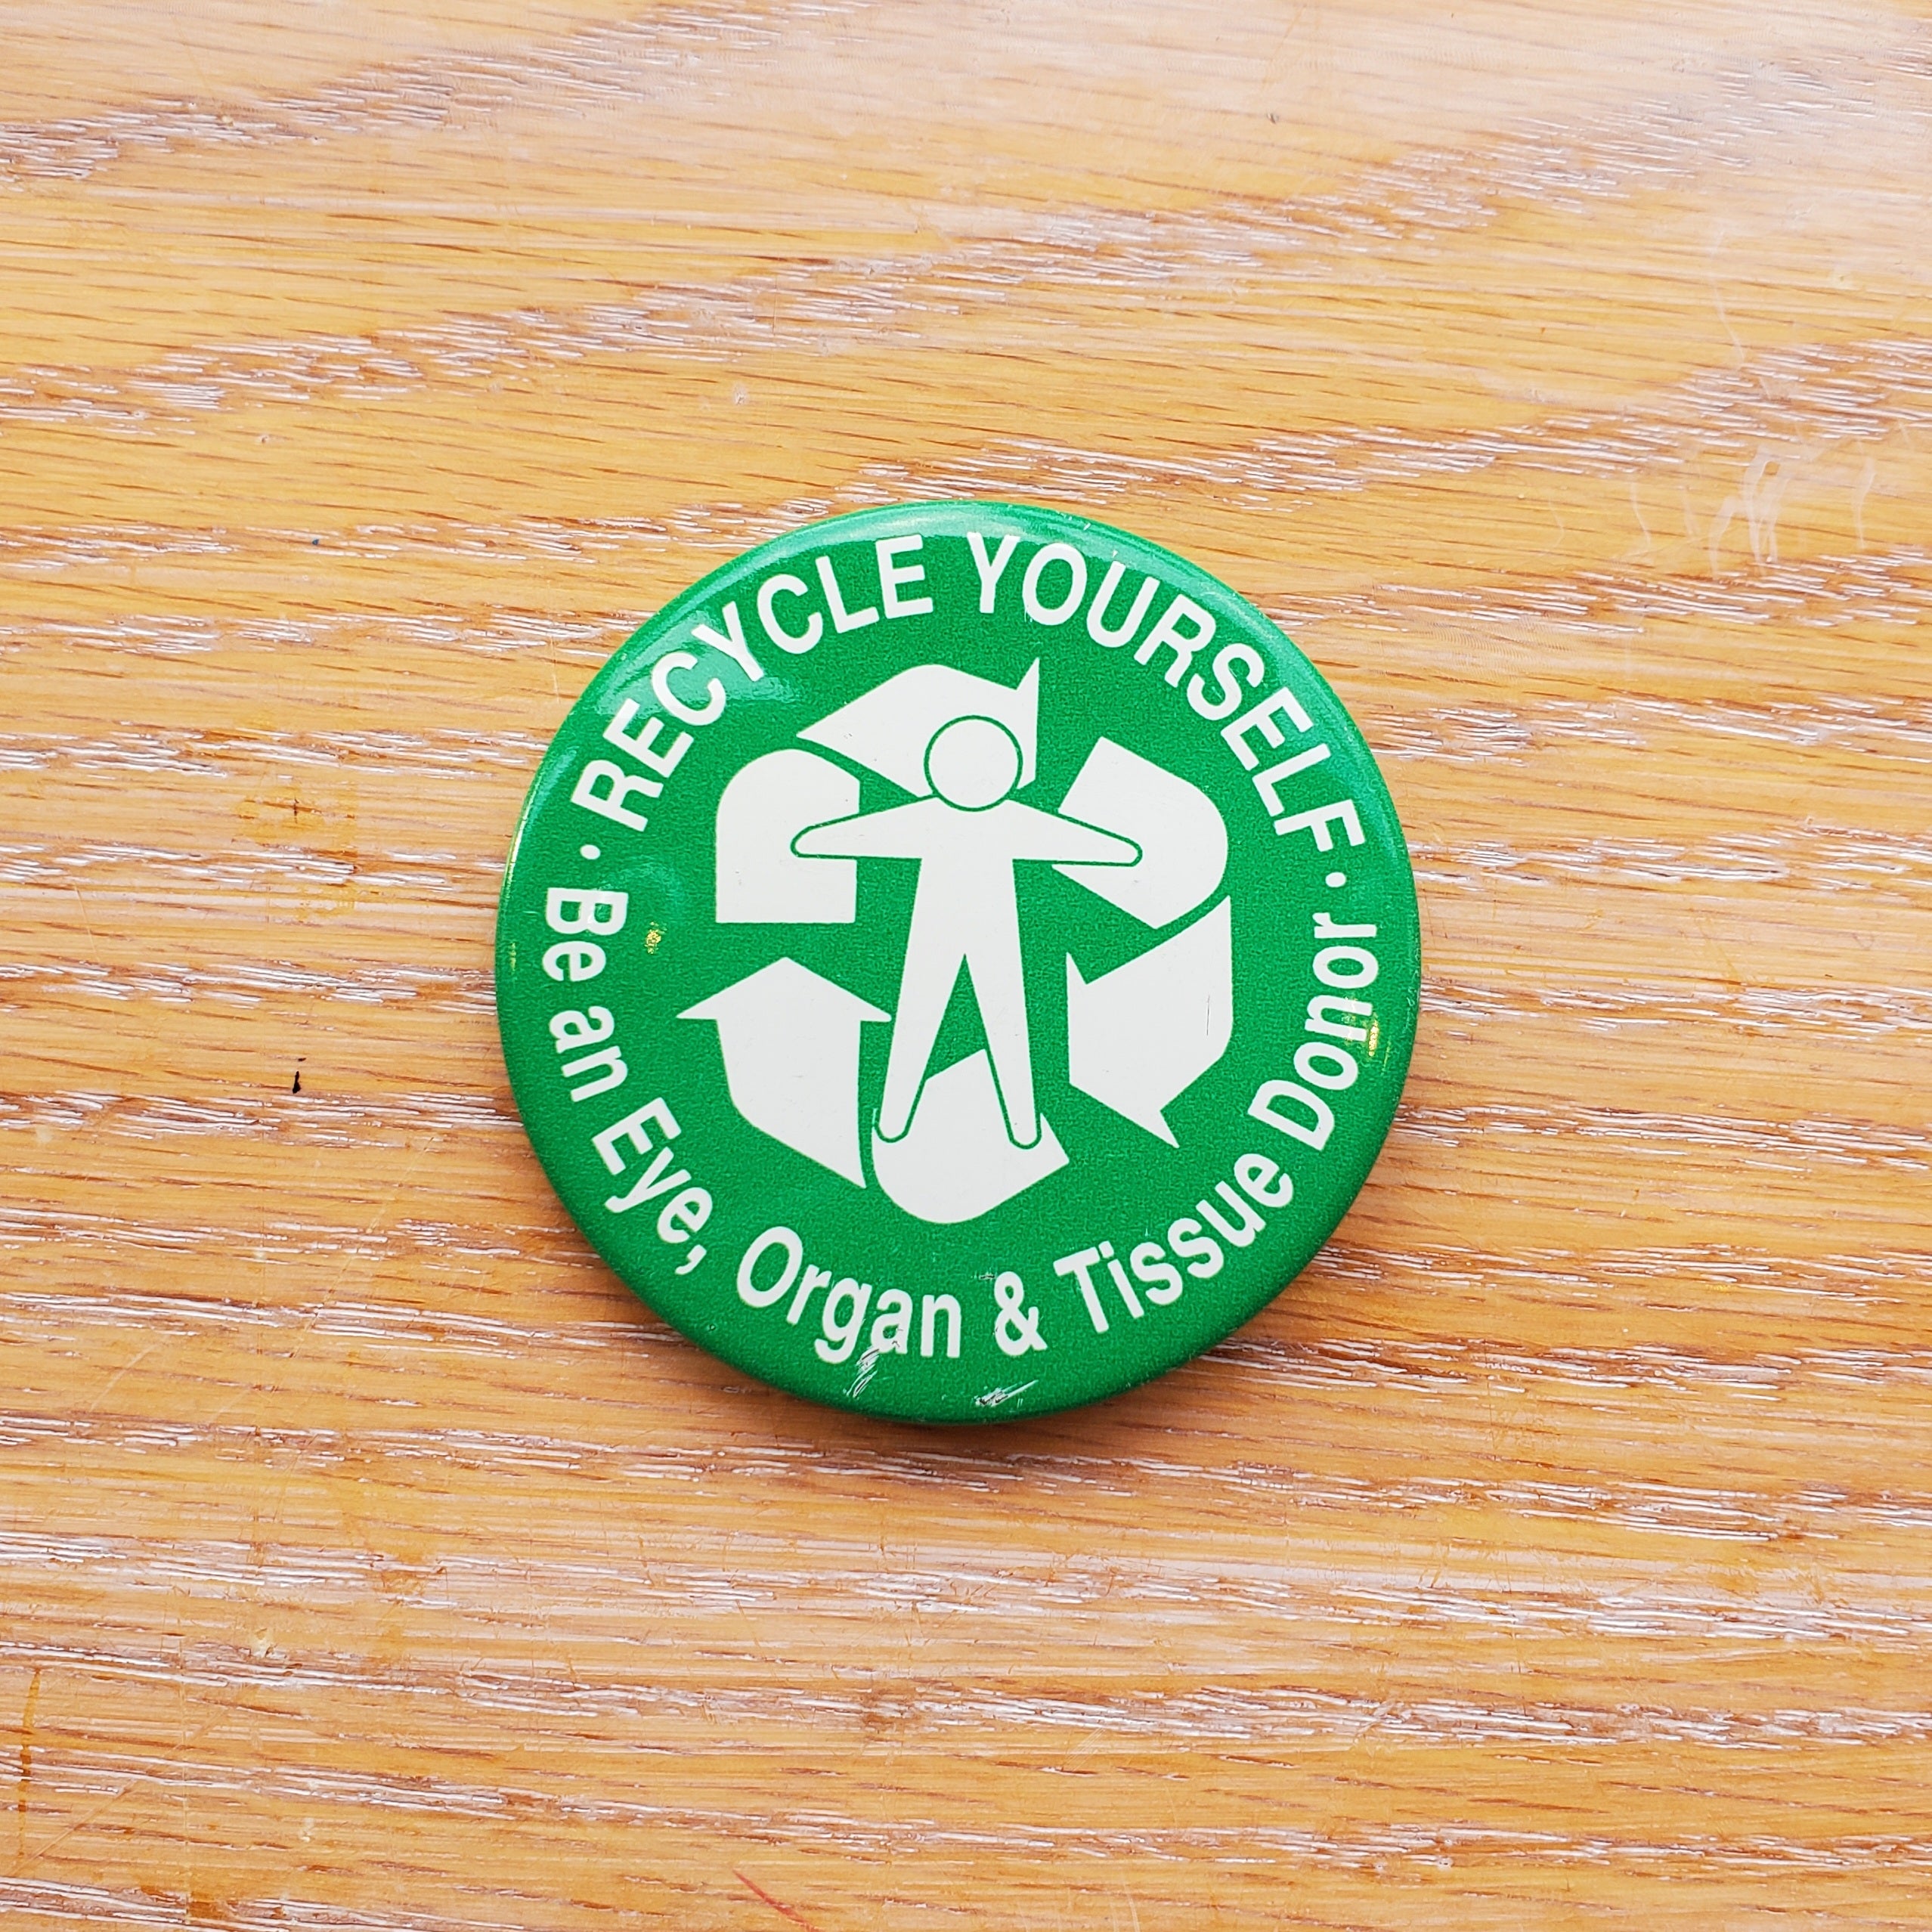 Recycle Yourself Vintage Pinback Button